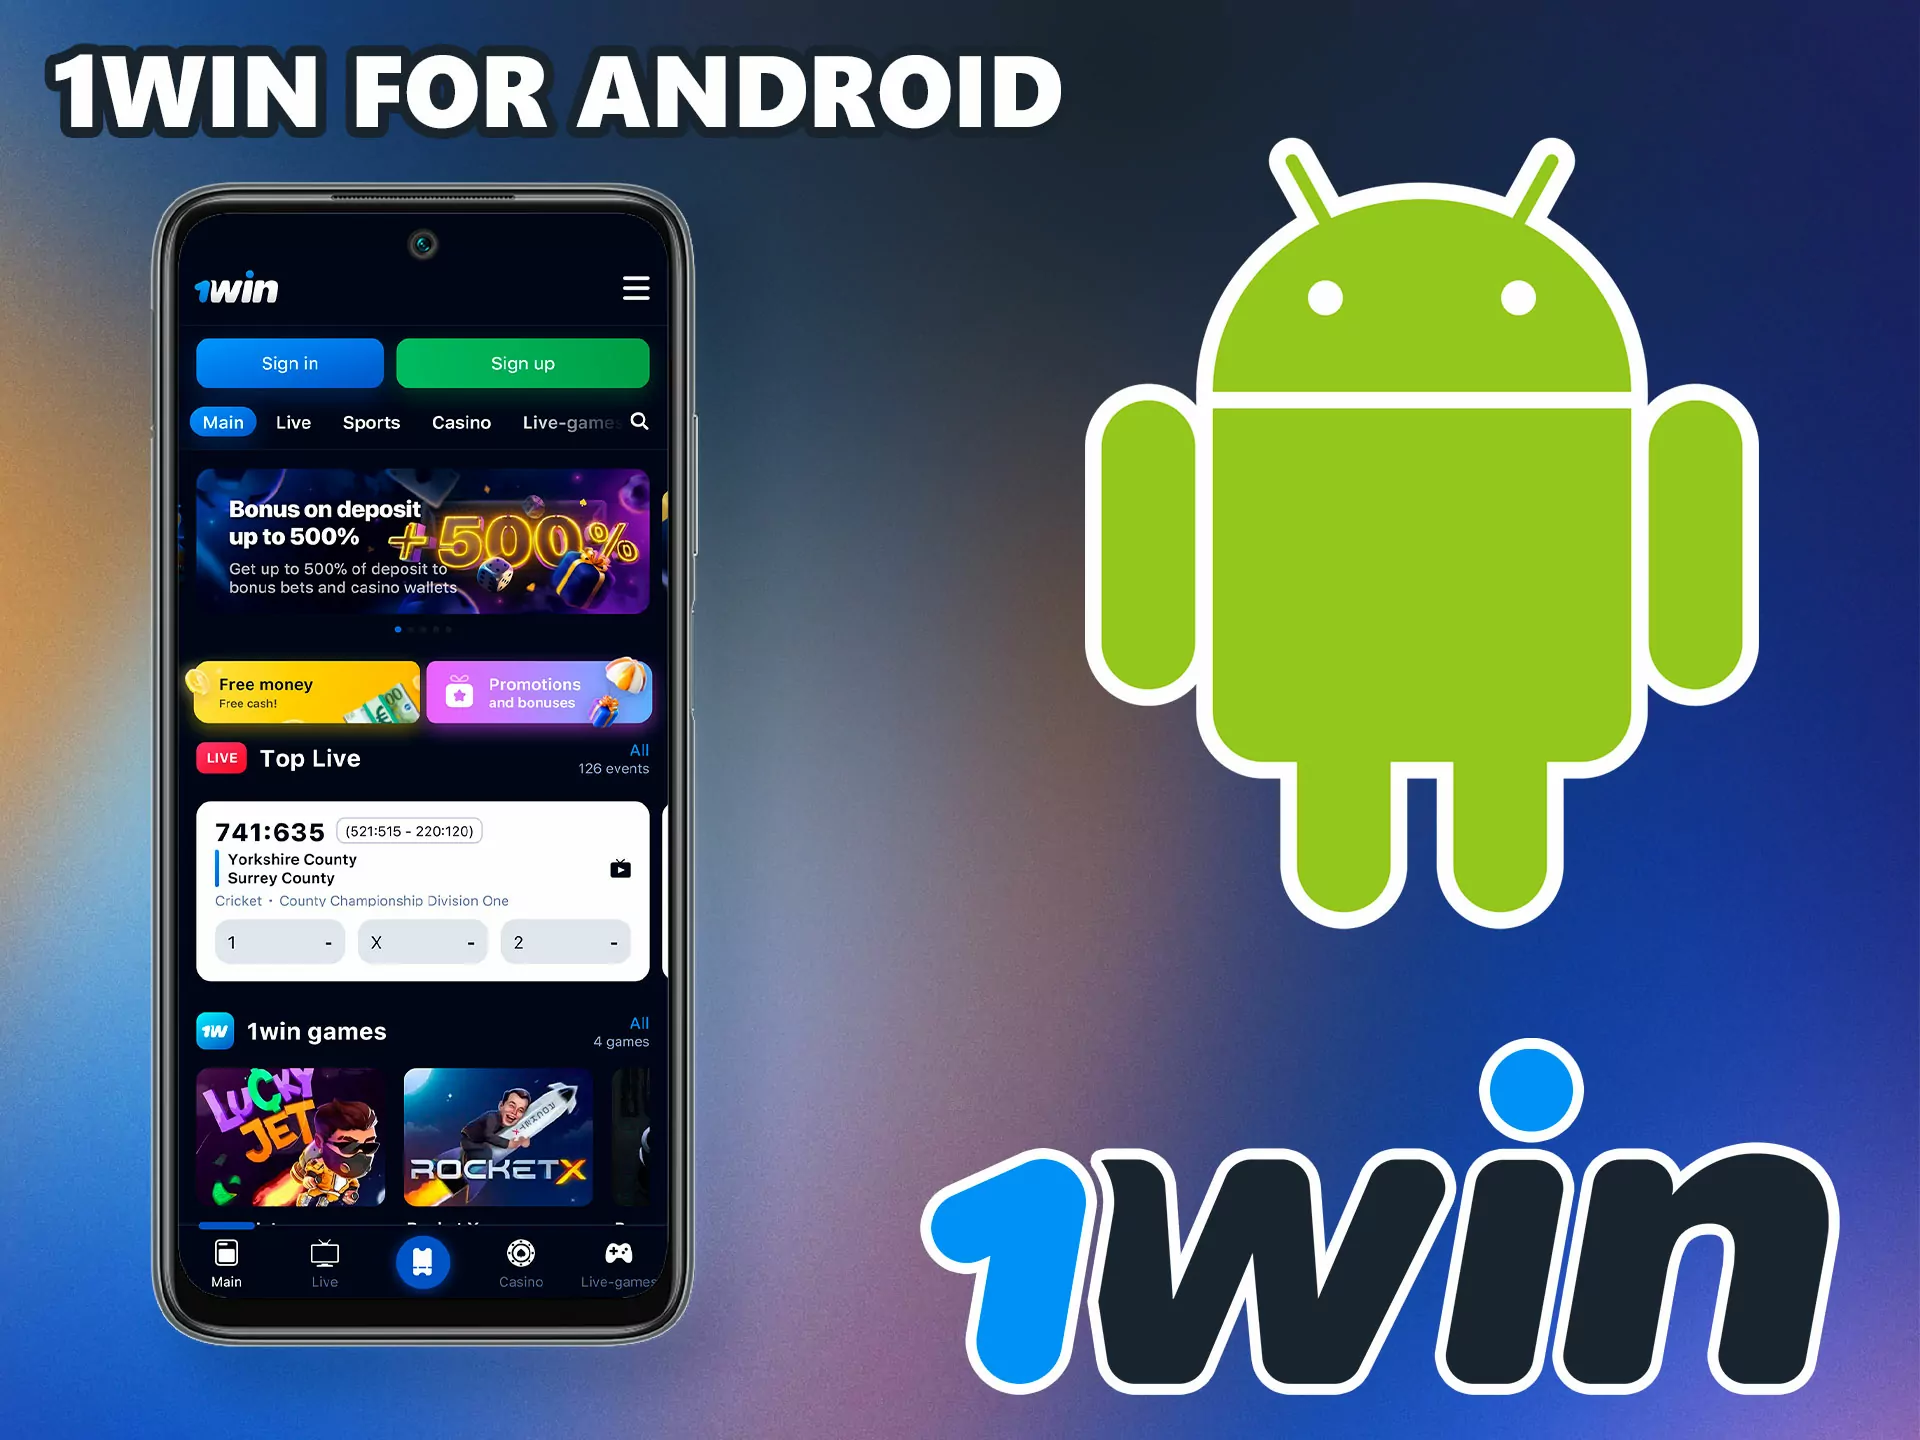 1win offers software for Android, this is the full functionality of the bookmaker in your pocket.